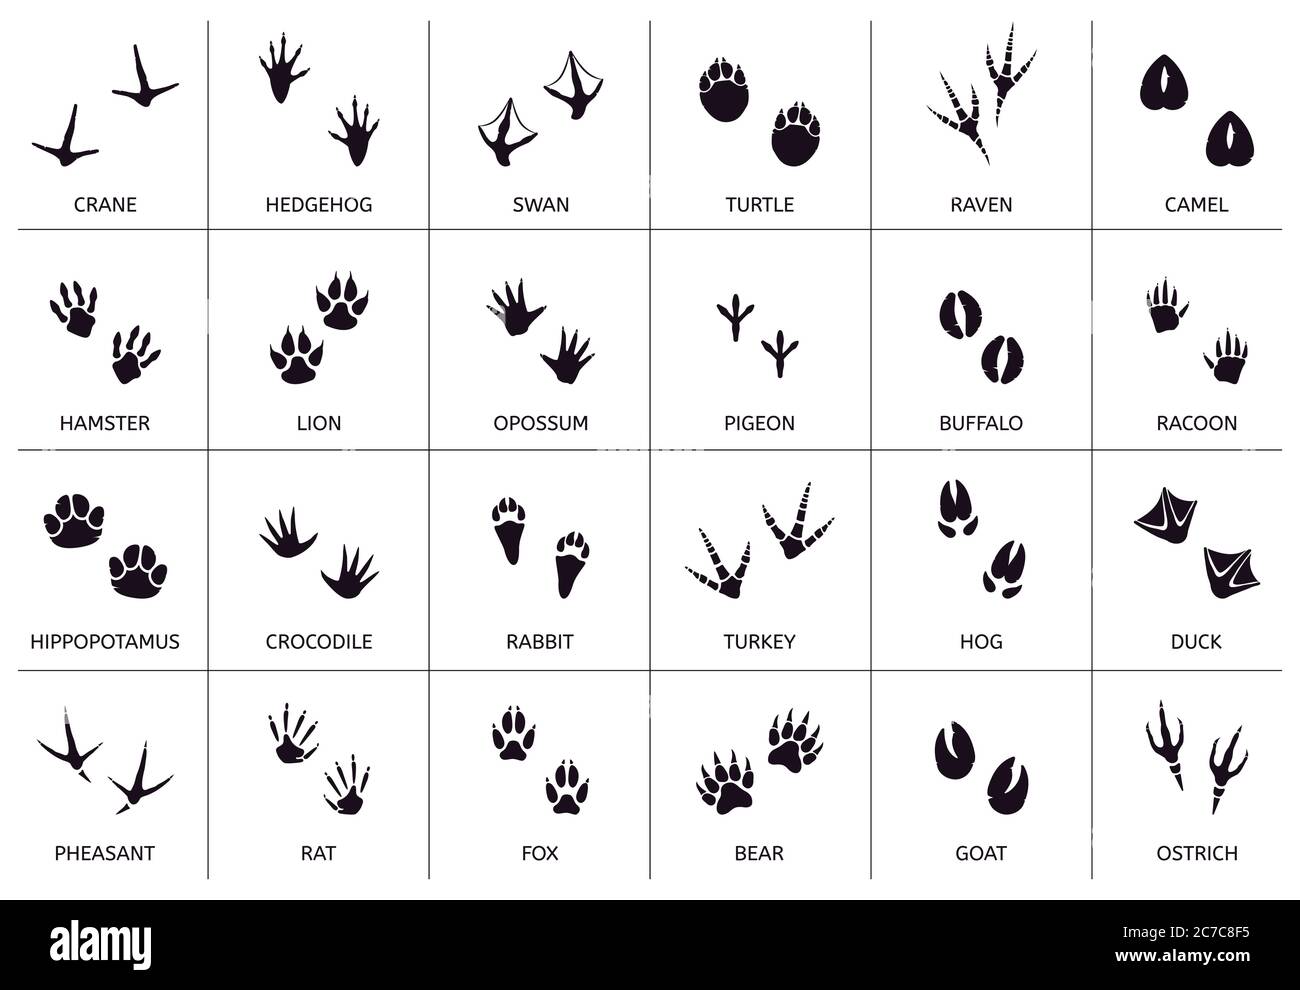 Animals footprint. Animal, birds and reptile foot marks, wild animals paw silhouettes, mammals walking paw tracks vector illustration set Stock Vector